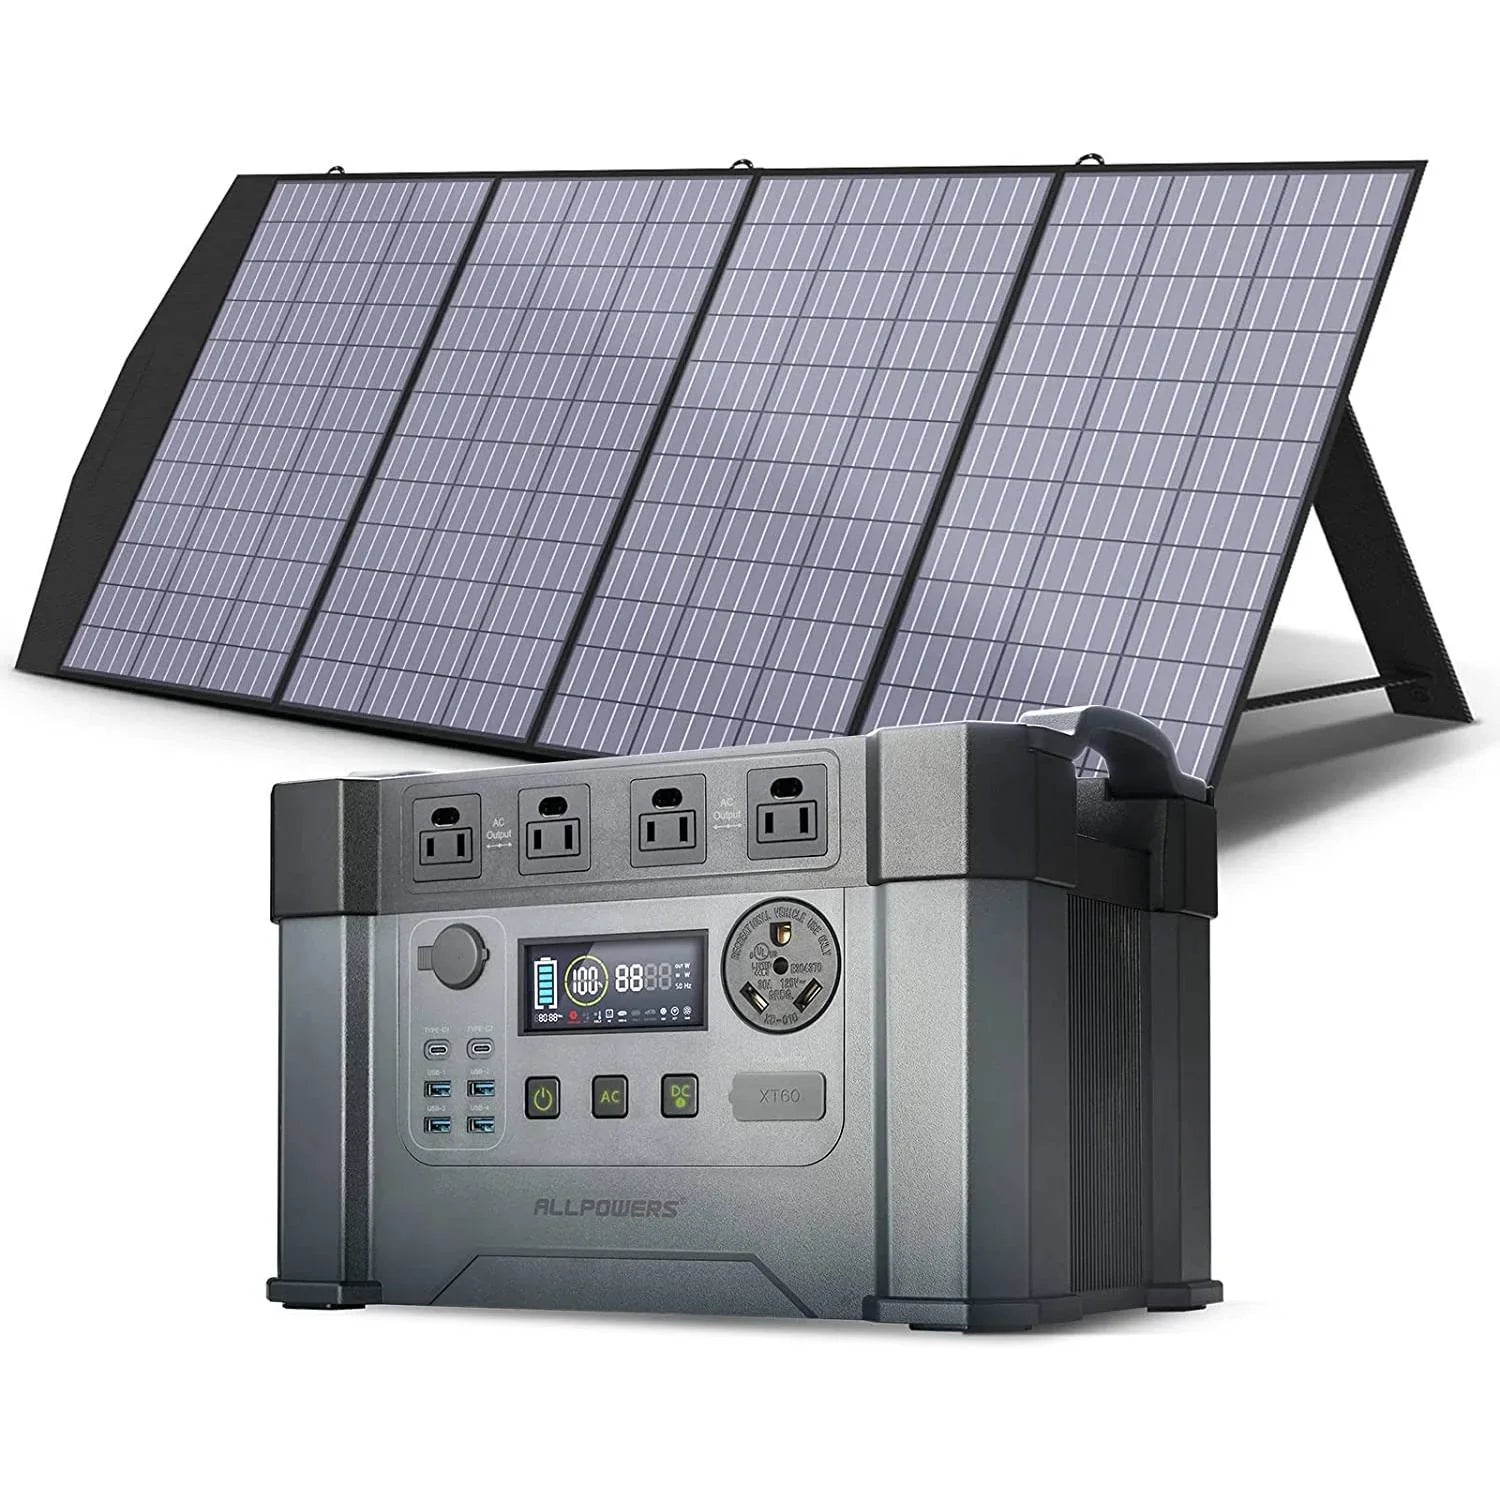 ALLPOWERS S2000 Pro Portable Power Station 2400W 1500Wh with Solar Pan